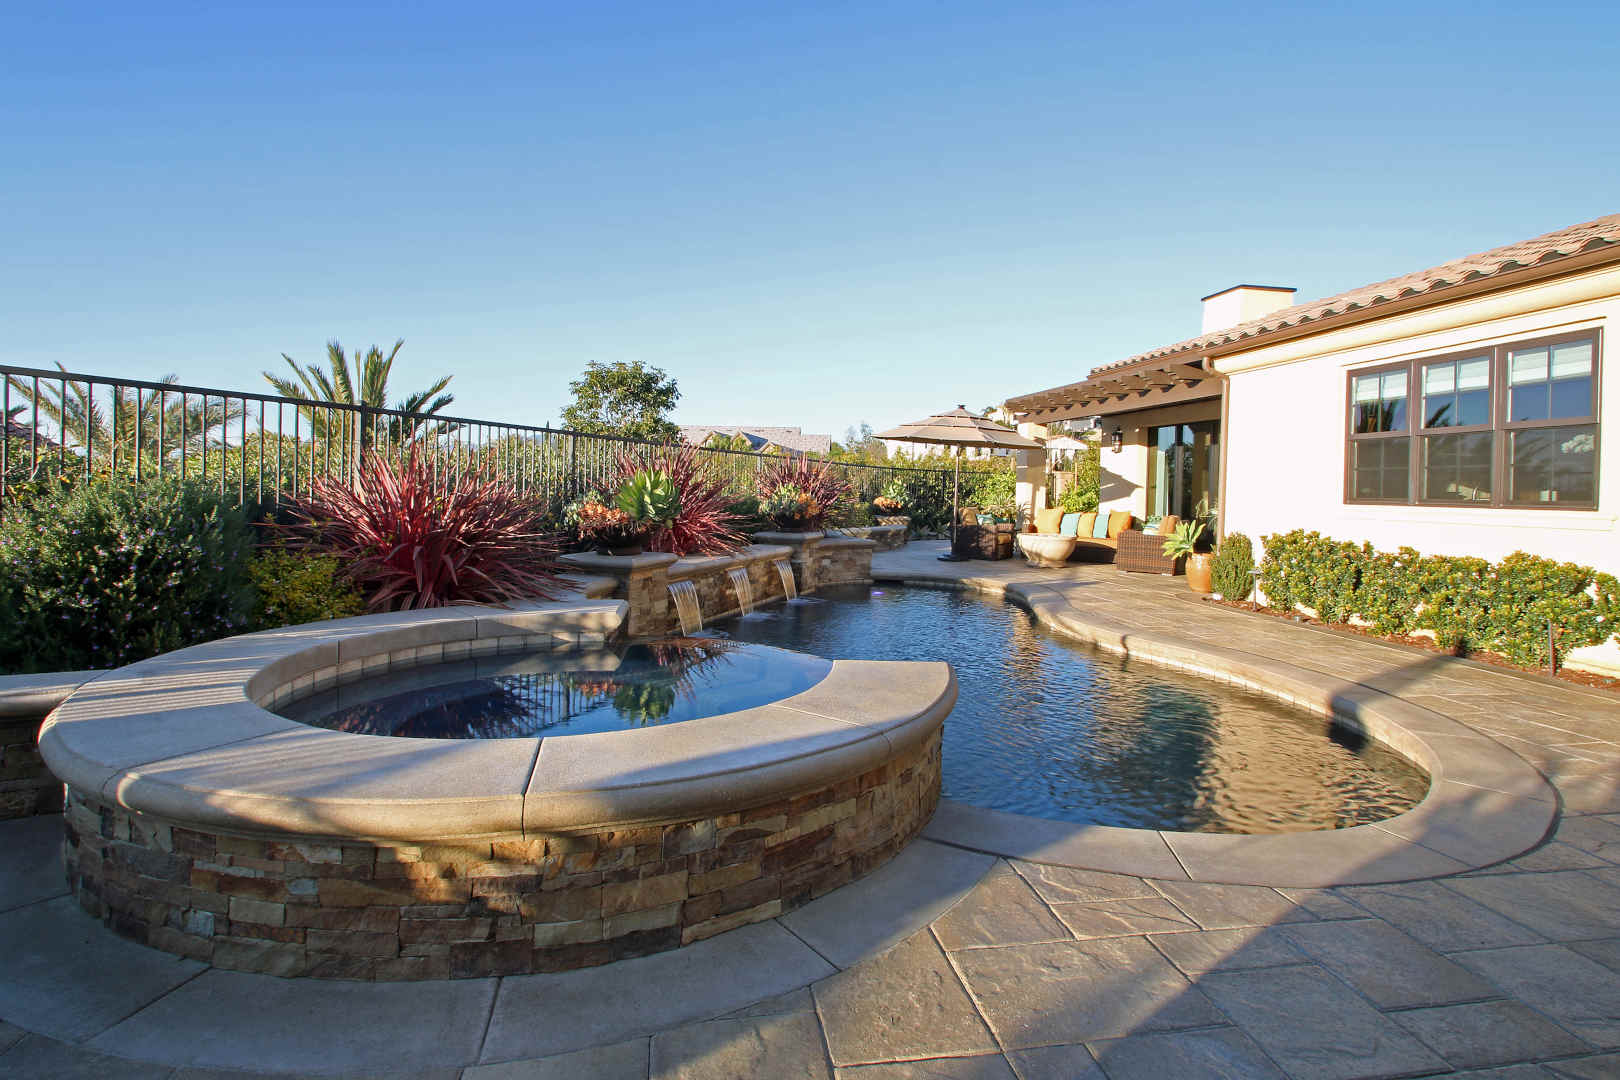 Elegant freeform pool and spa with stone hardscape, Dreamscape by MGR leading pool contractor in Orange County